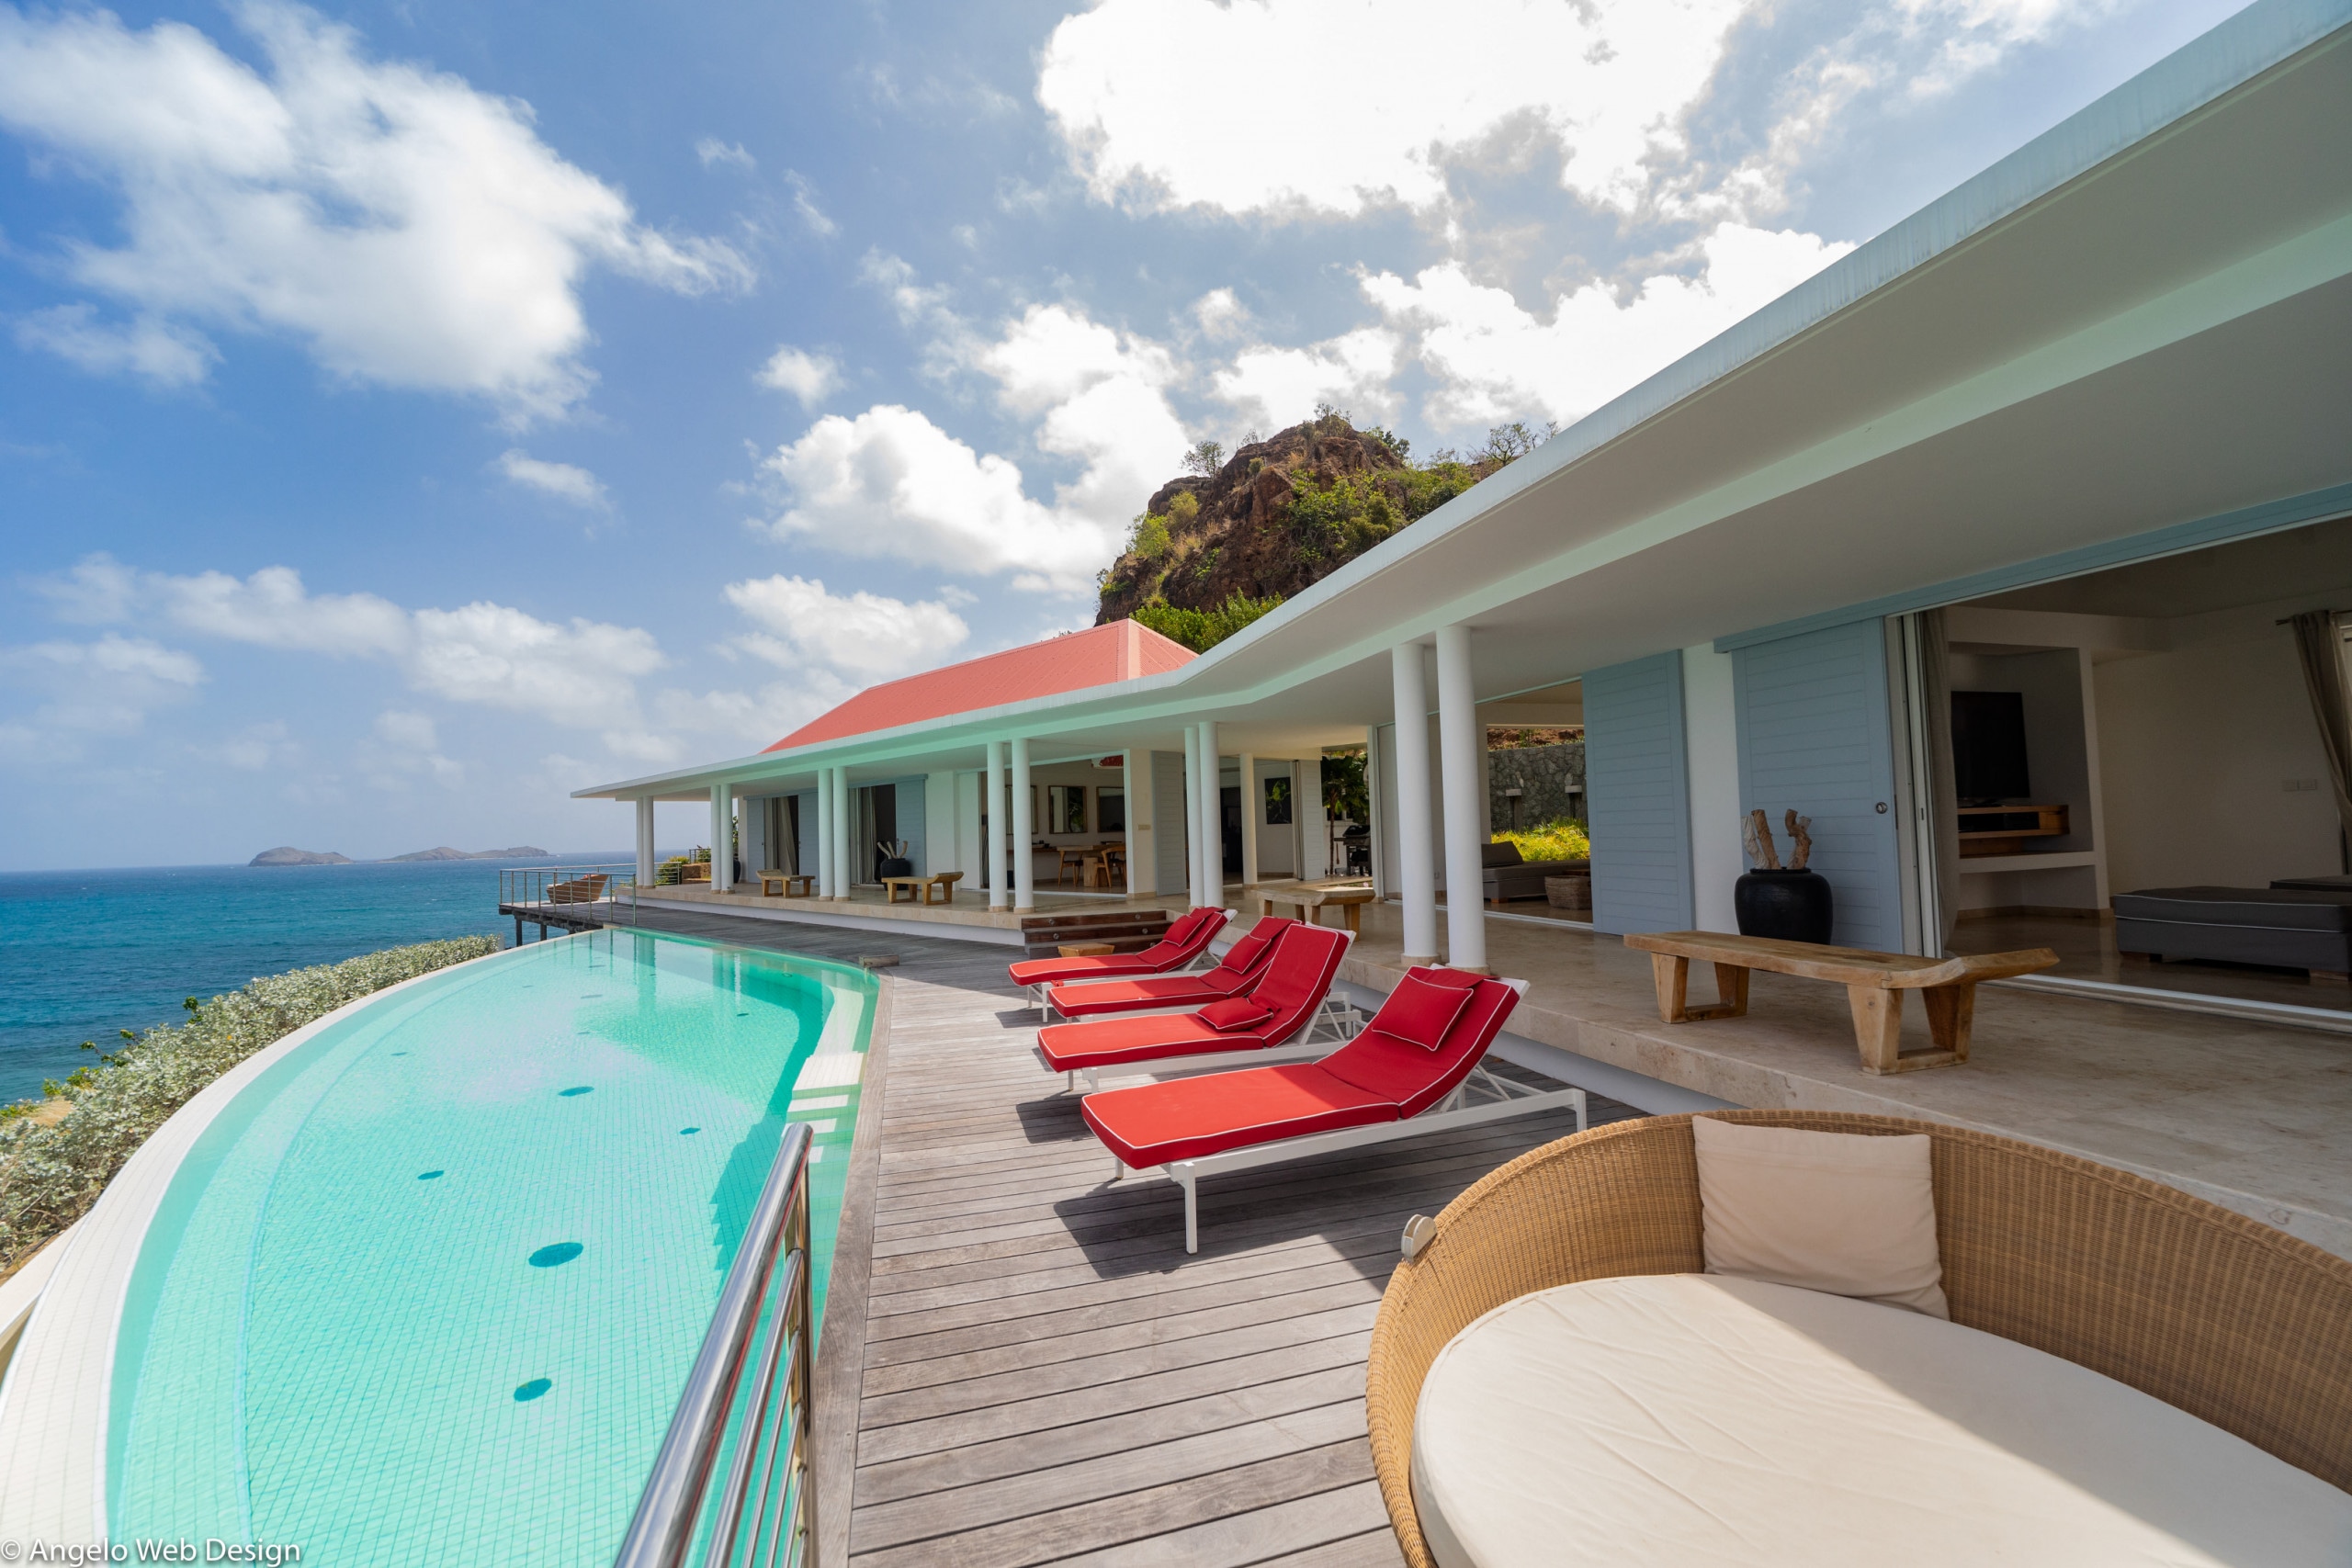 Heated pool, large terrace with loungers area deckchairs. Panoramic views over the St-Jean Bay.&nbsp;